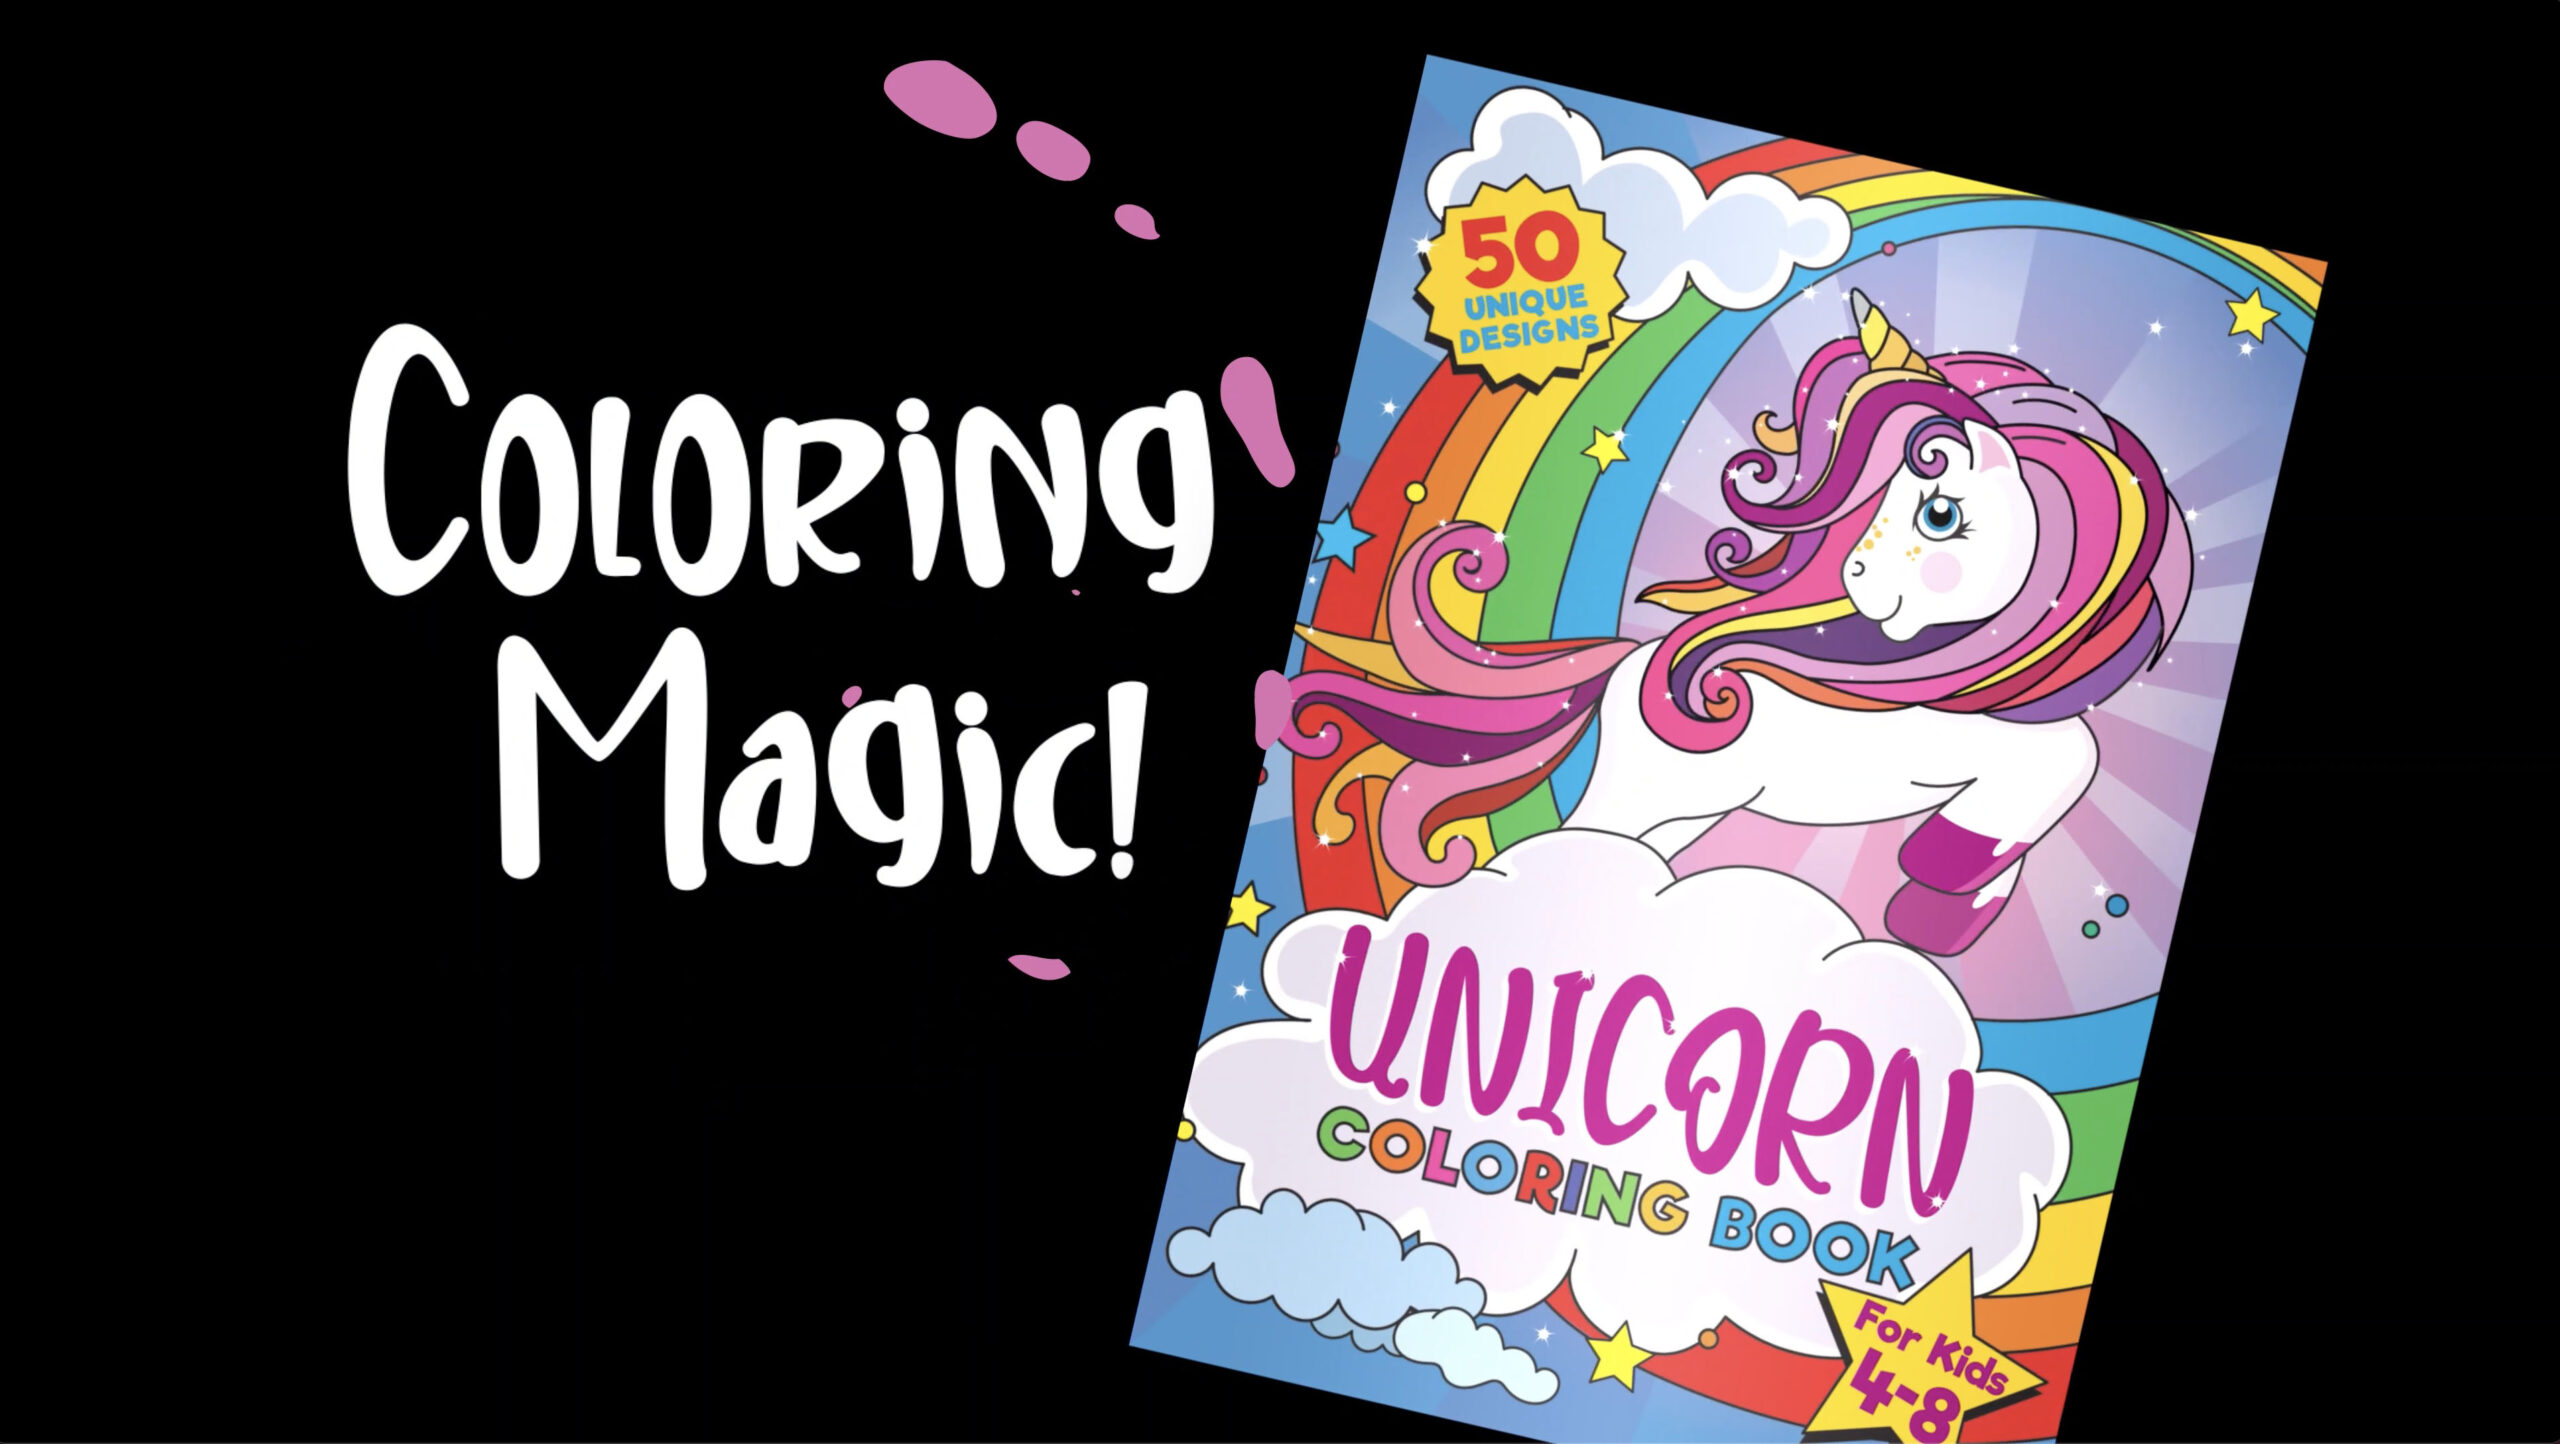 A kids unicorn coloring book front cover